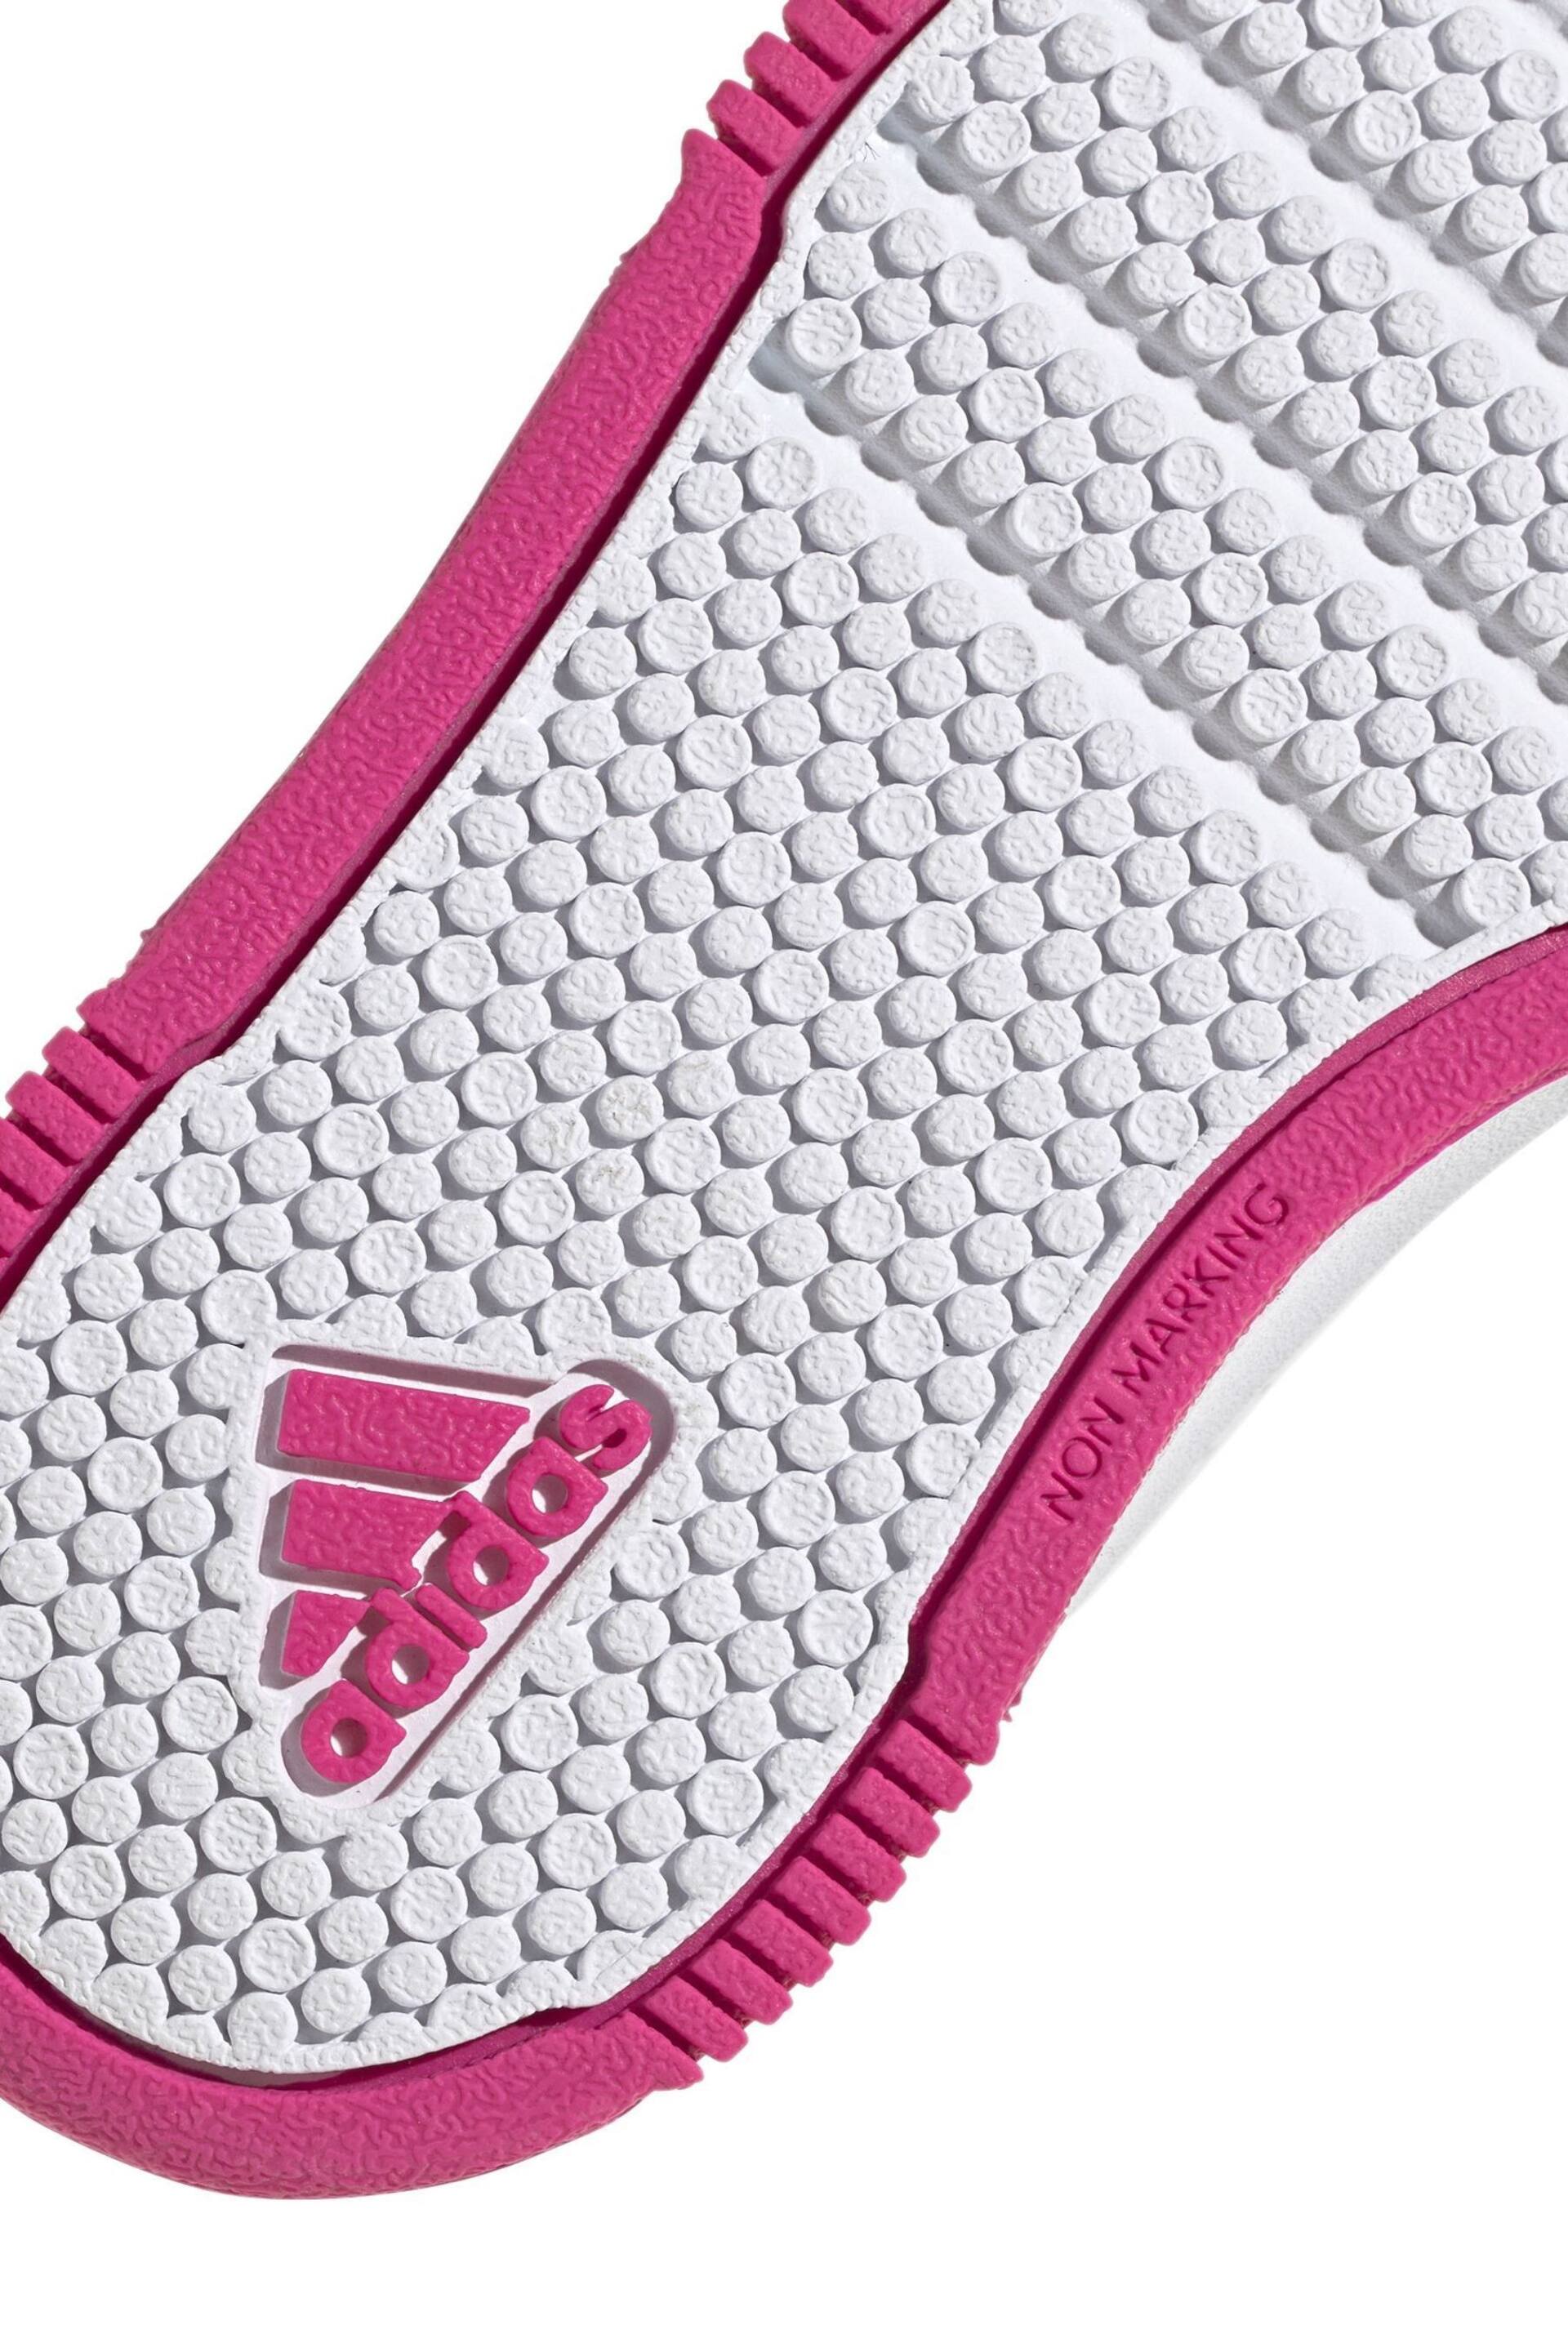 adidas White/Pink Tensaur Hook and Loop Shoes - Image 9 of 9